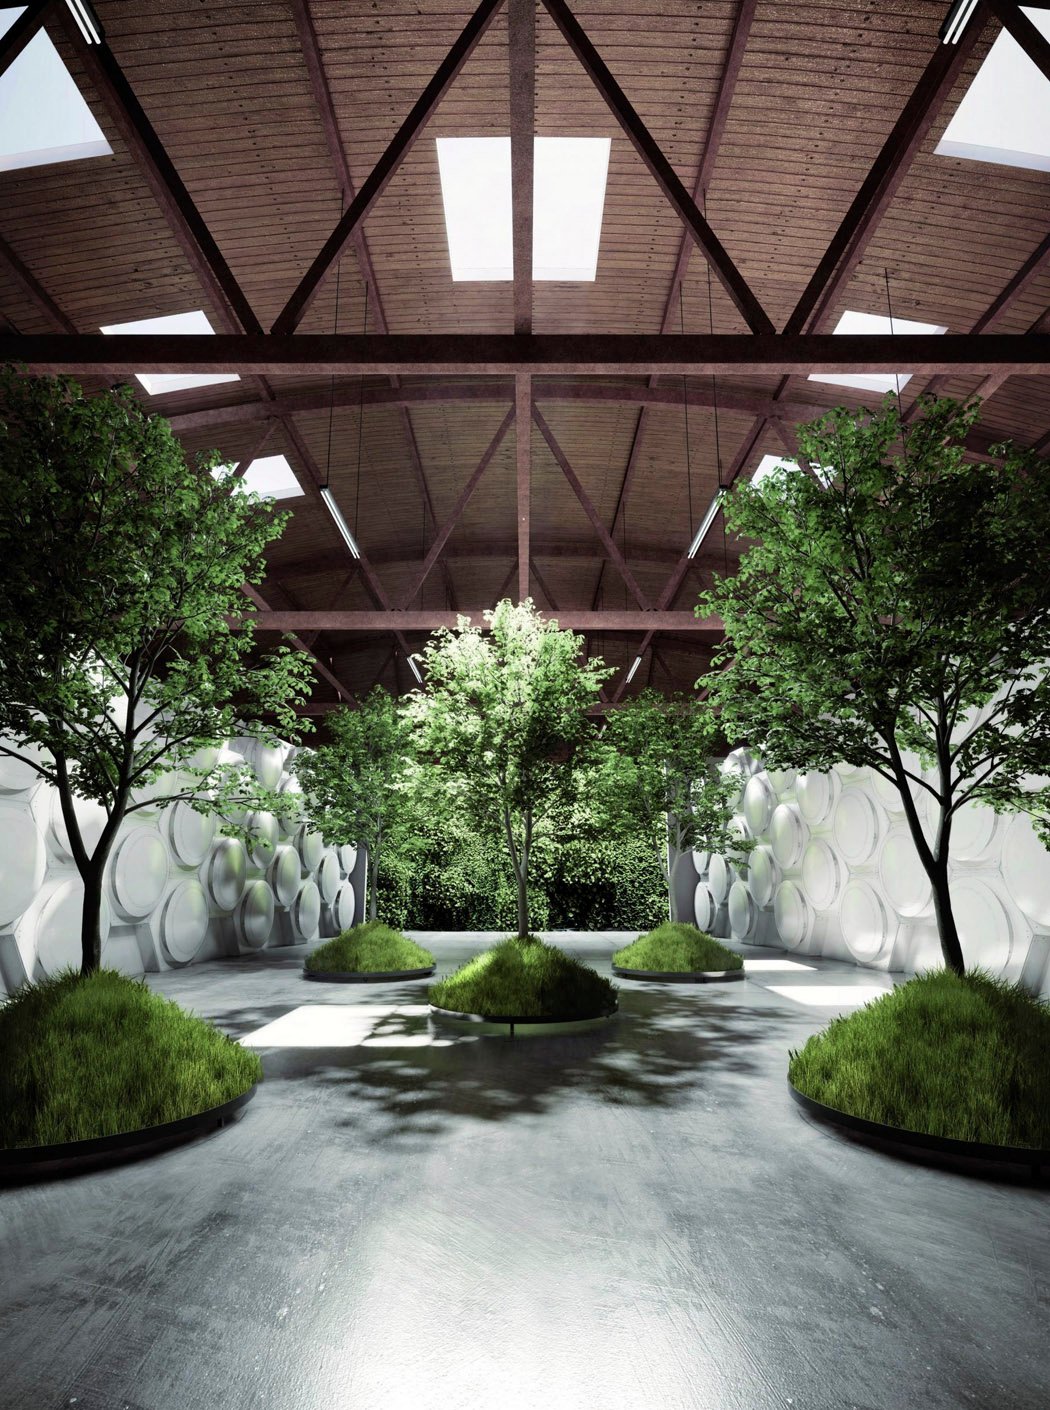 Architectural designs humans and nature alike: Part 2 - Yanko Design